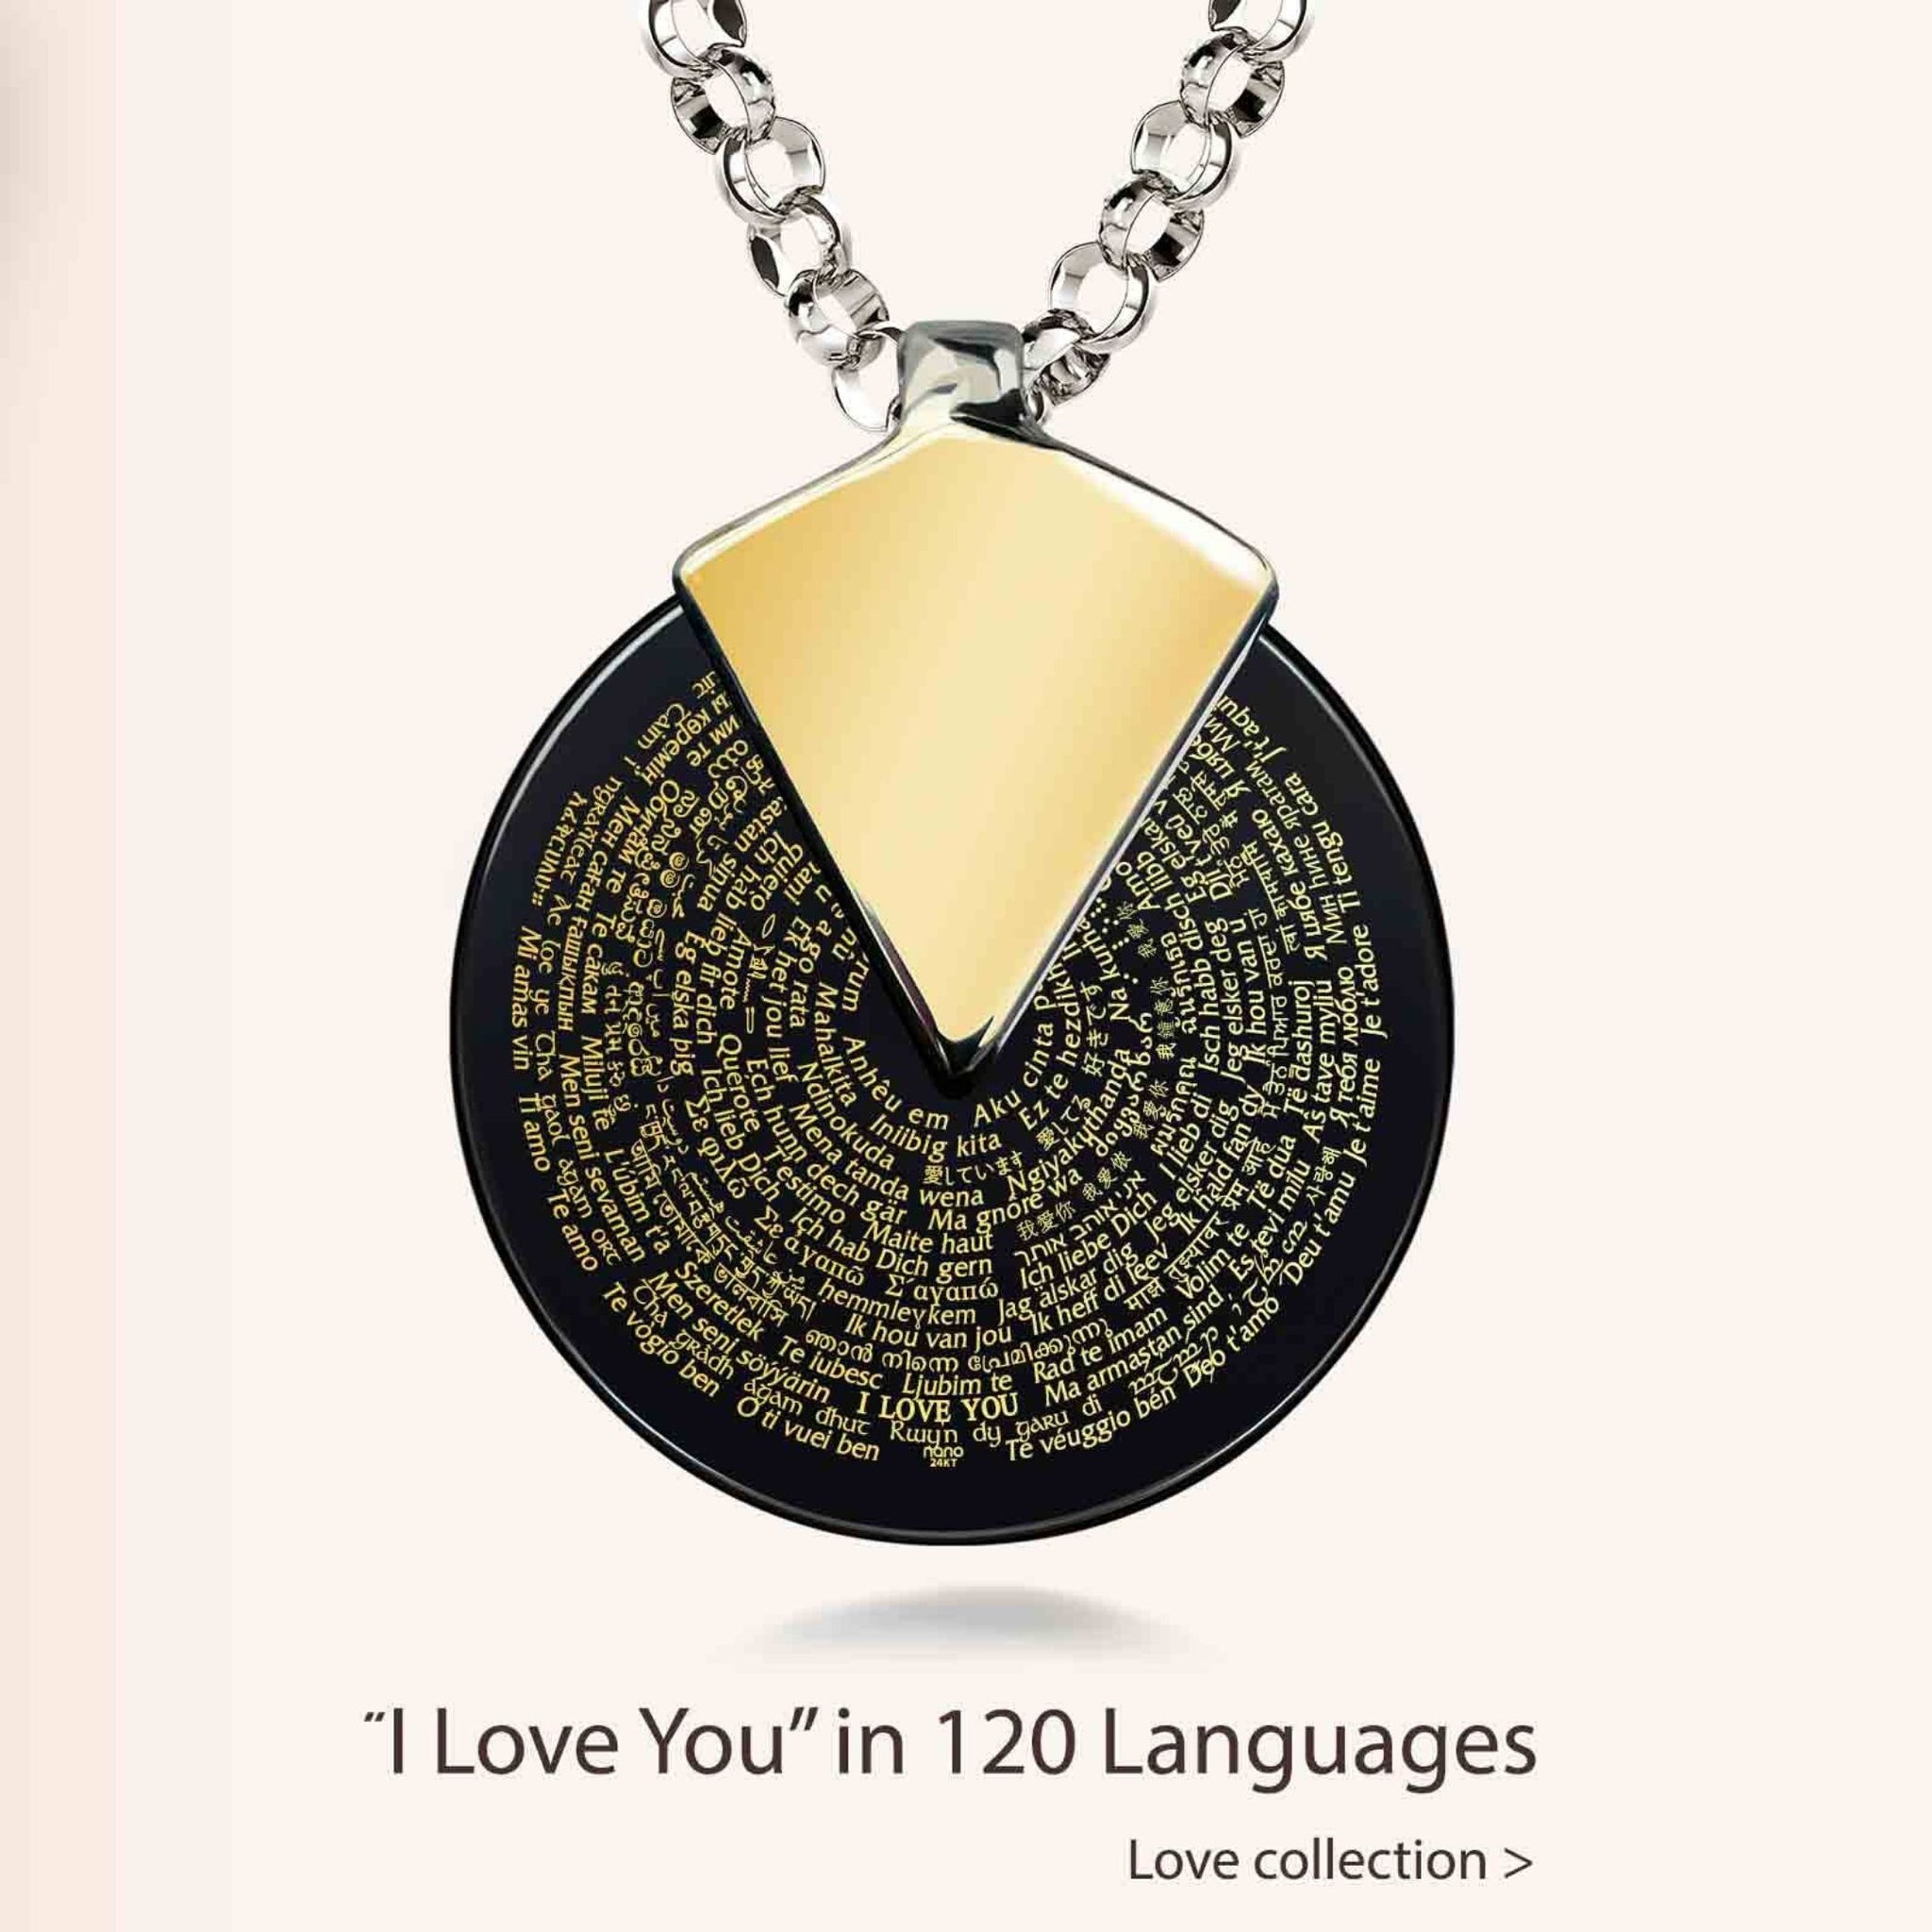 7 Dazzling Anniversary Necklaces for Her to Choose From